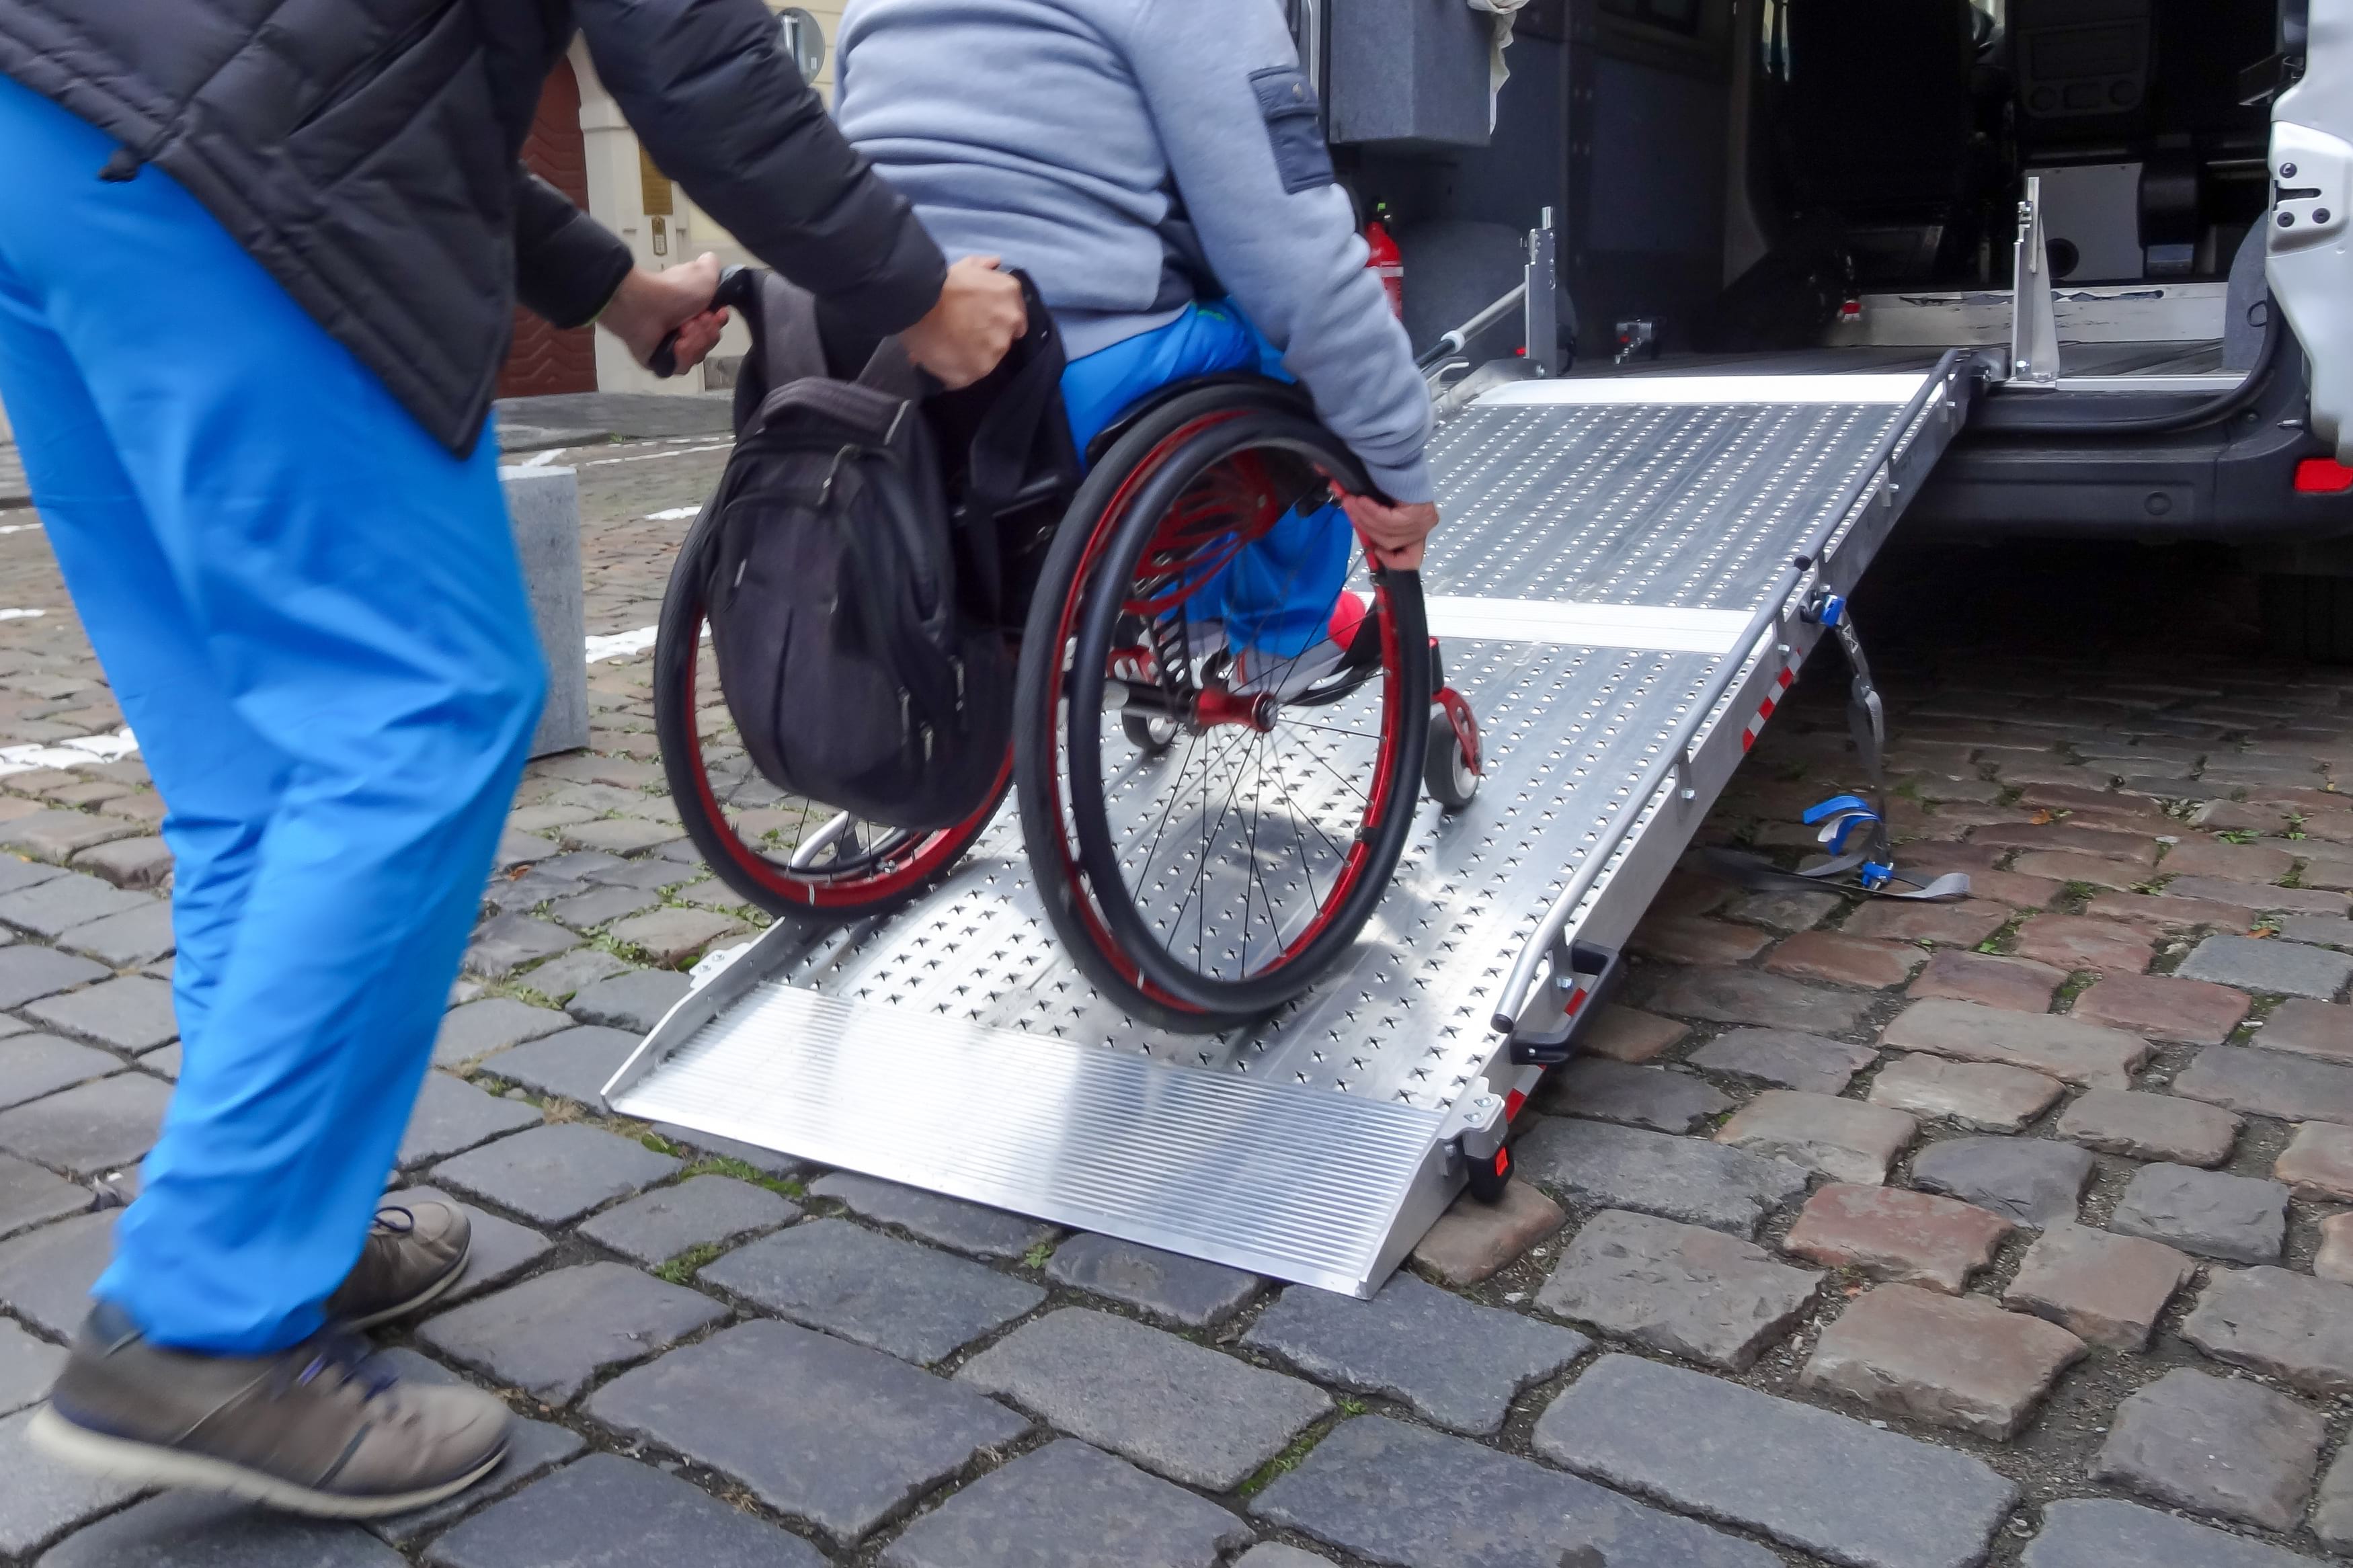 Person in wheelchair loading onto van